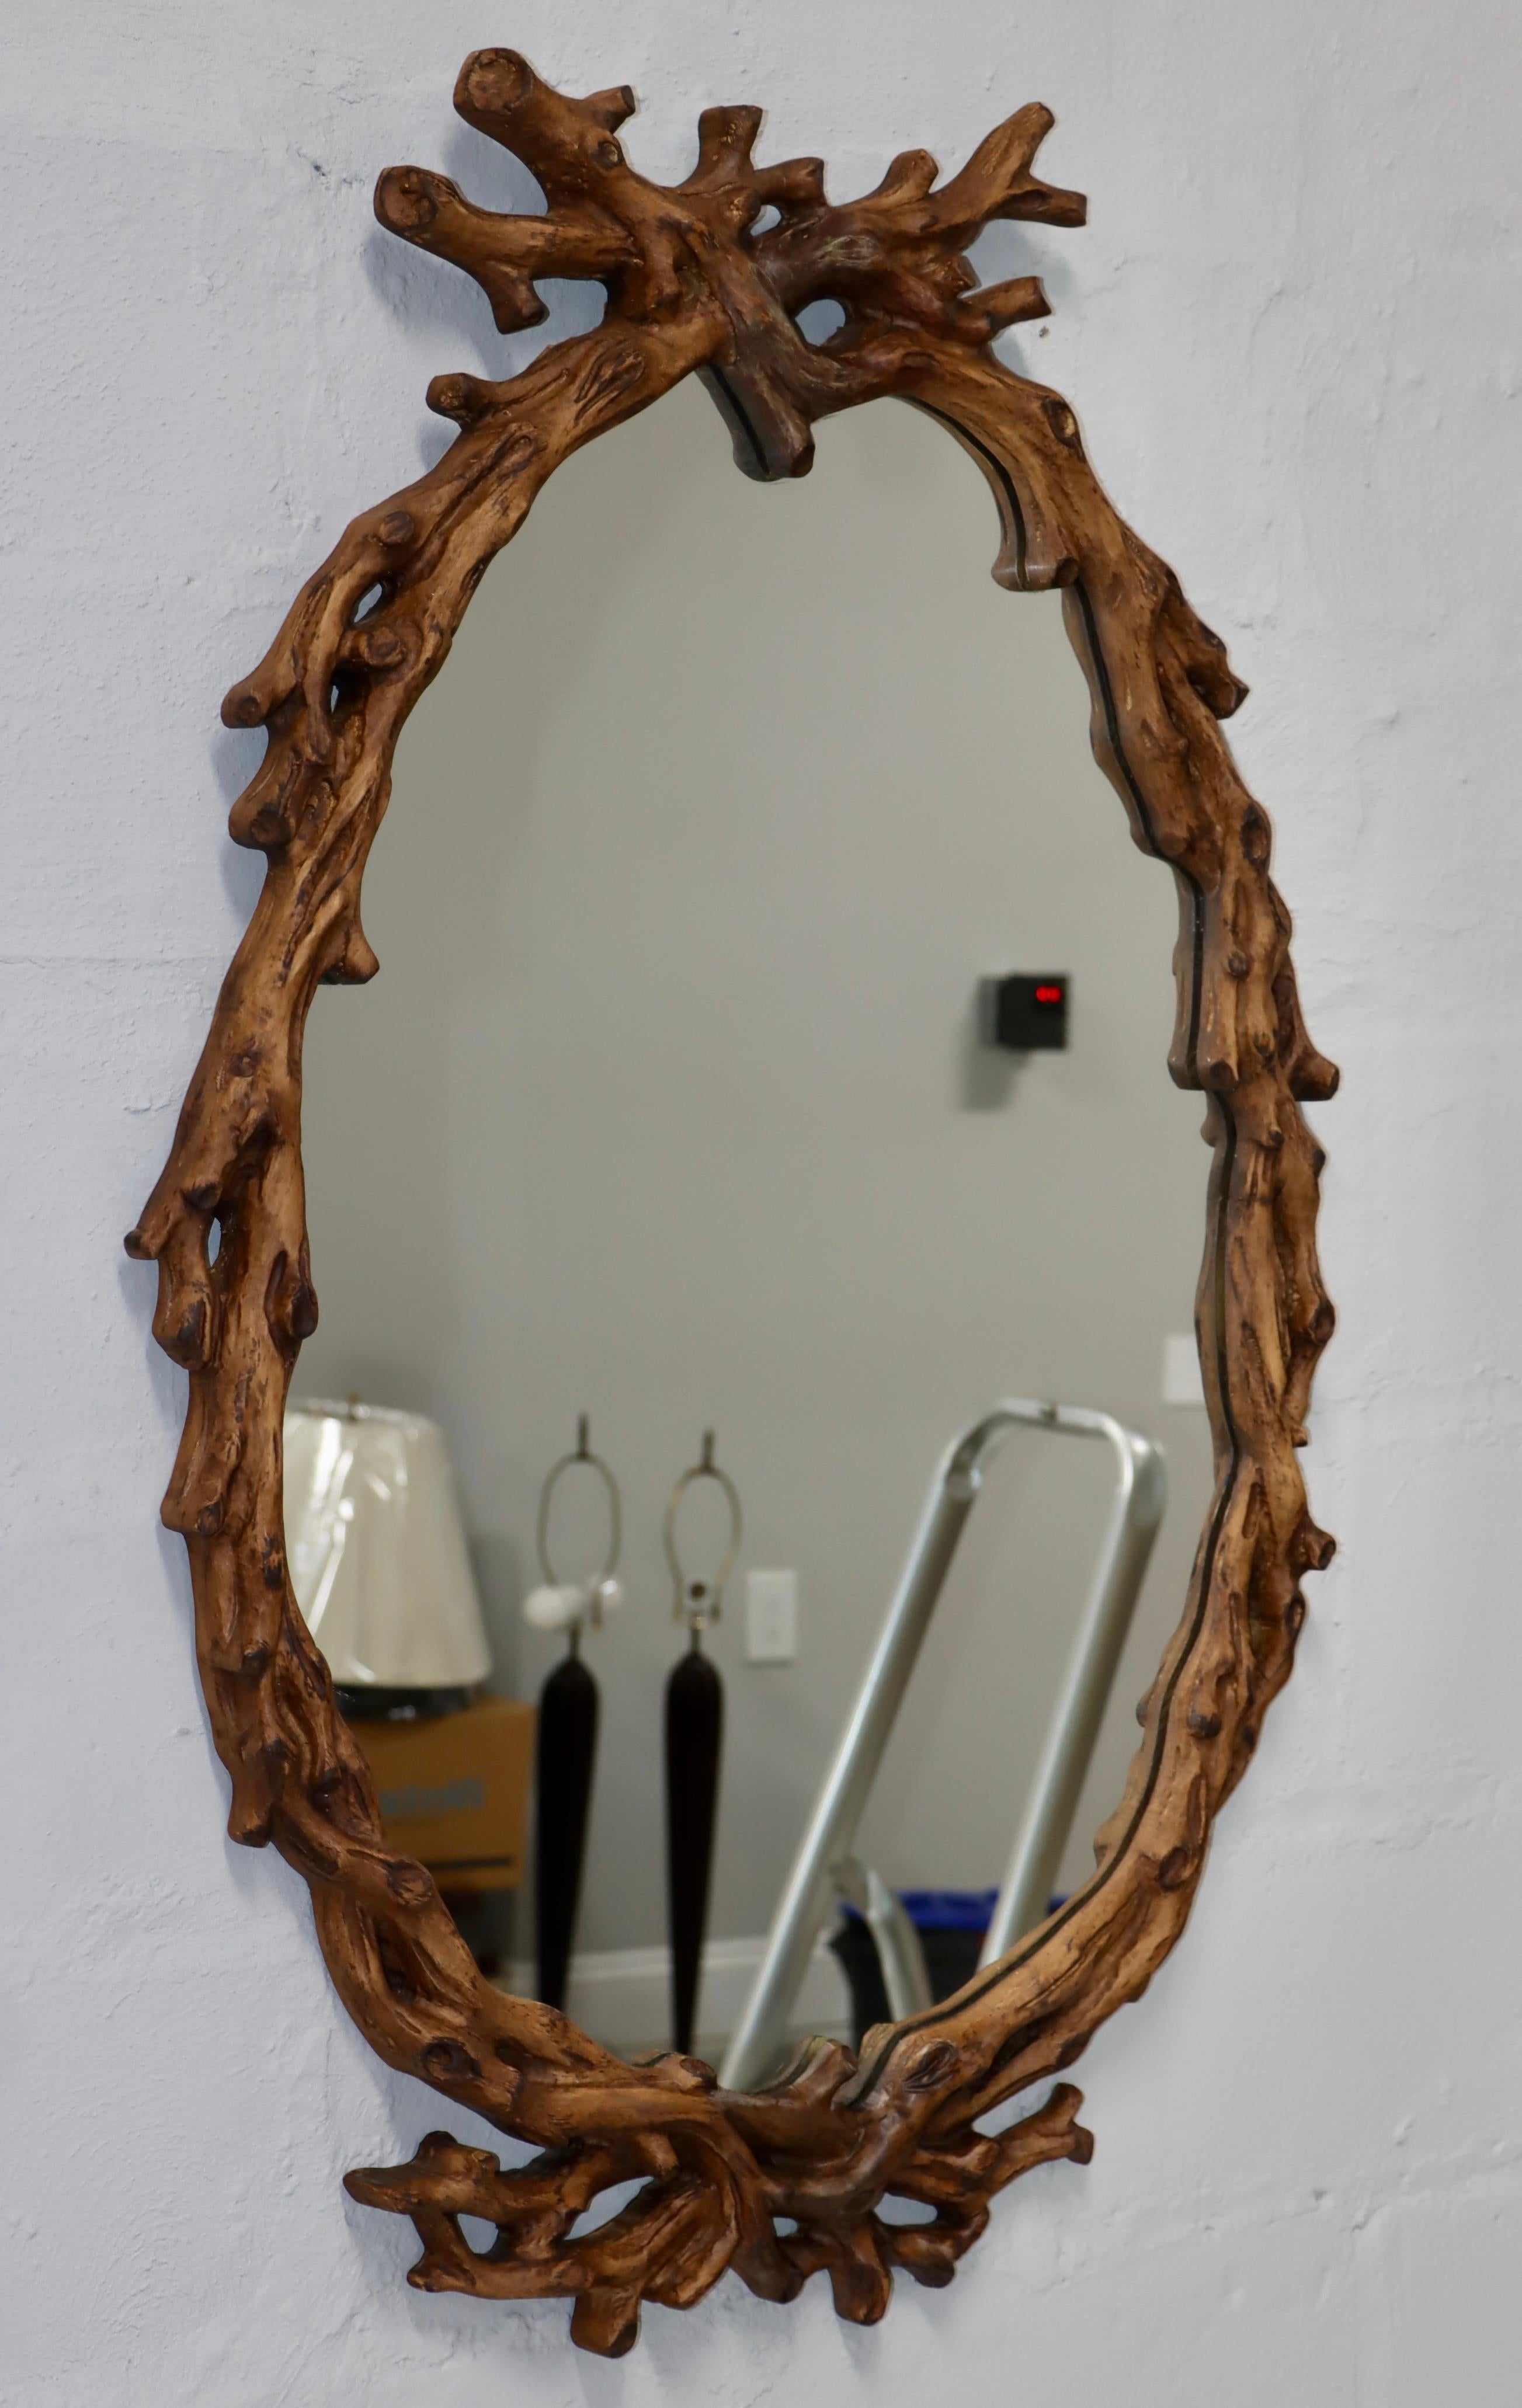 1960's mid-century modern wall mirror by Francisco Hurtado with branches motif, in vintage condition with minor wear and patina due to age and use.